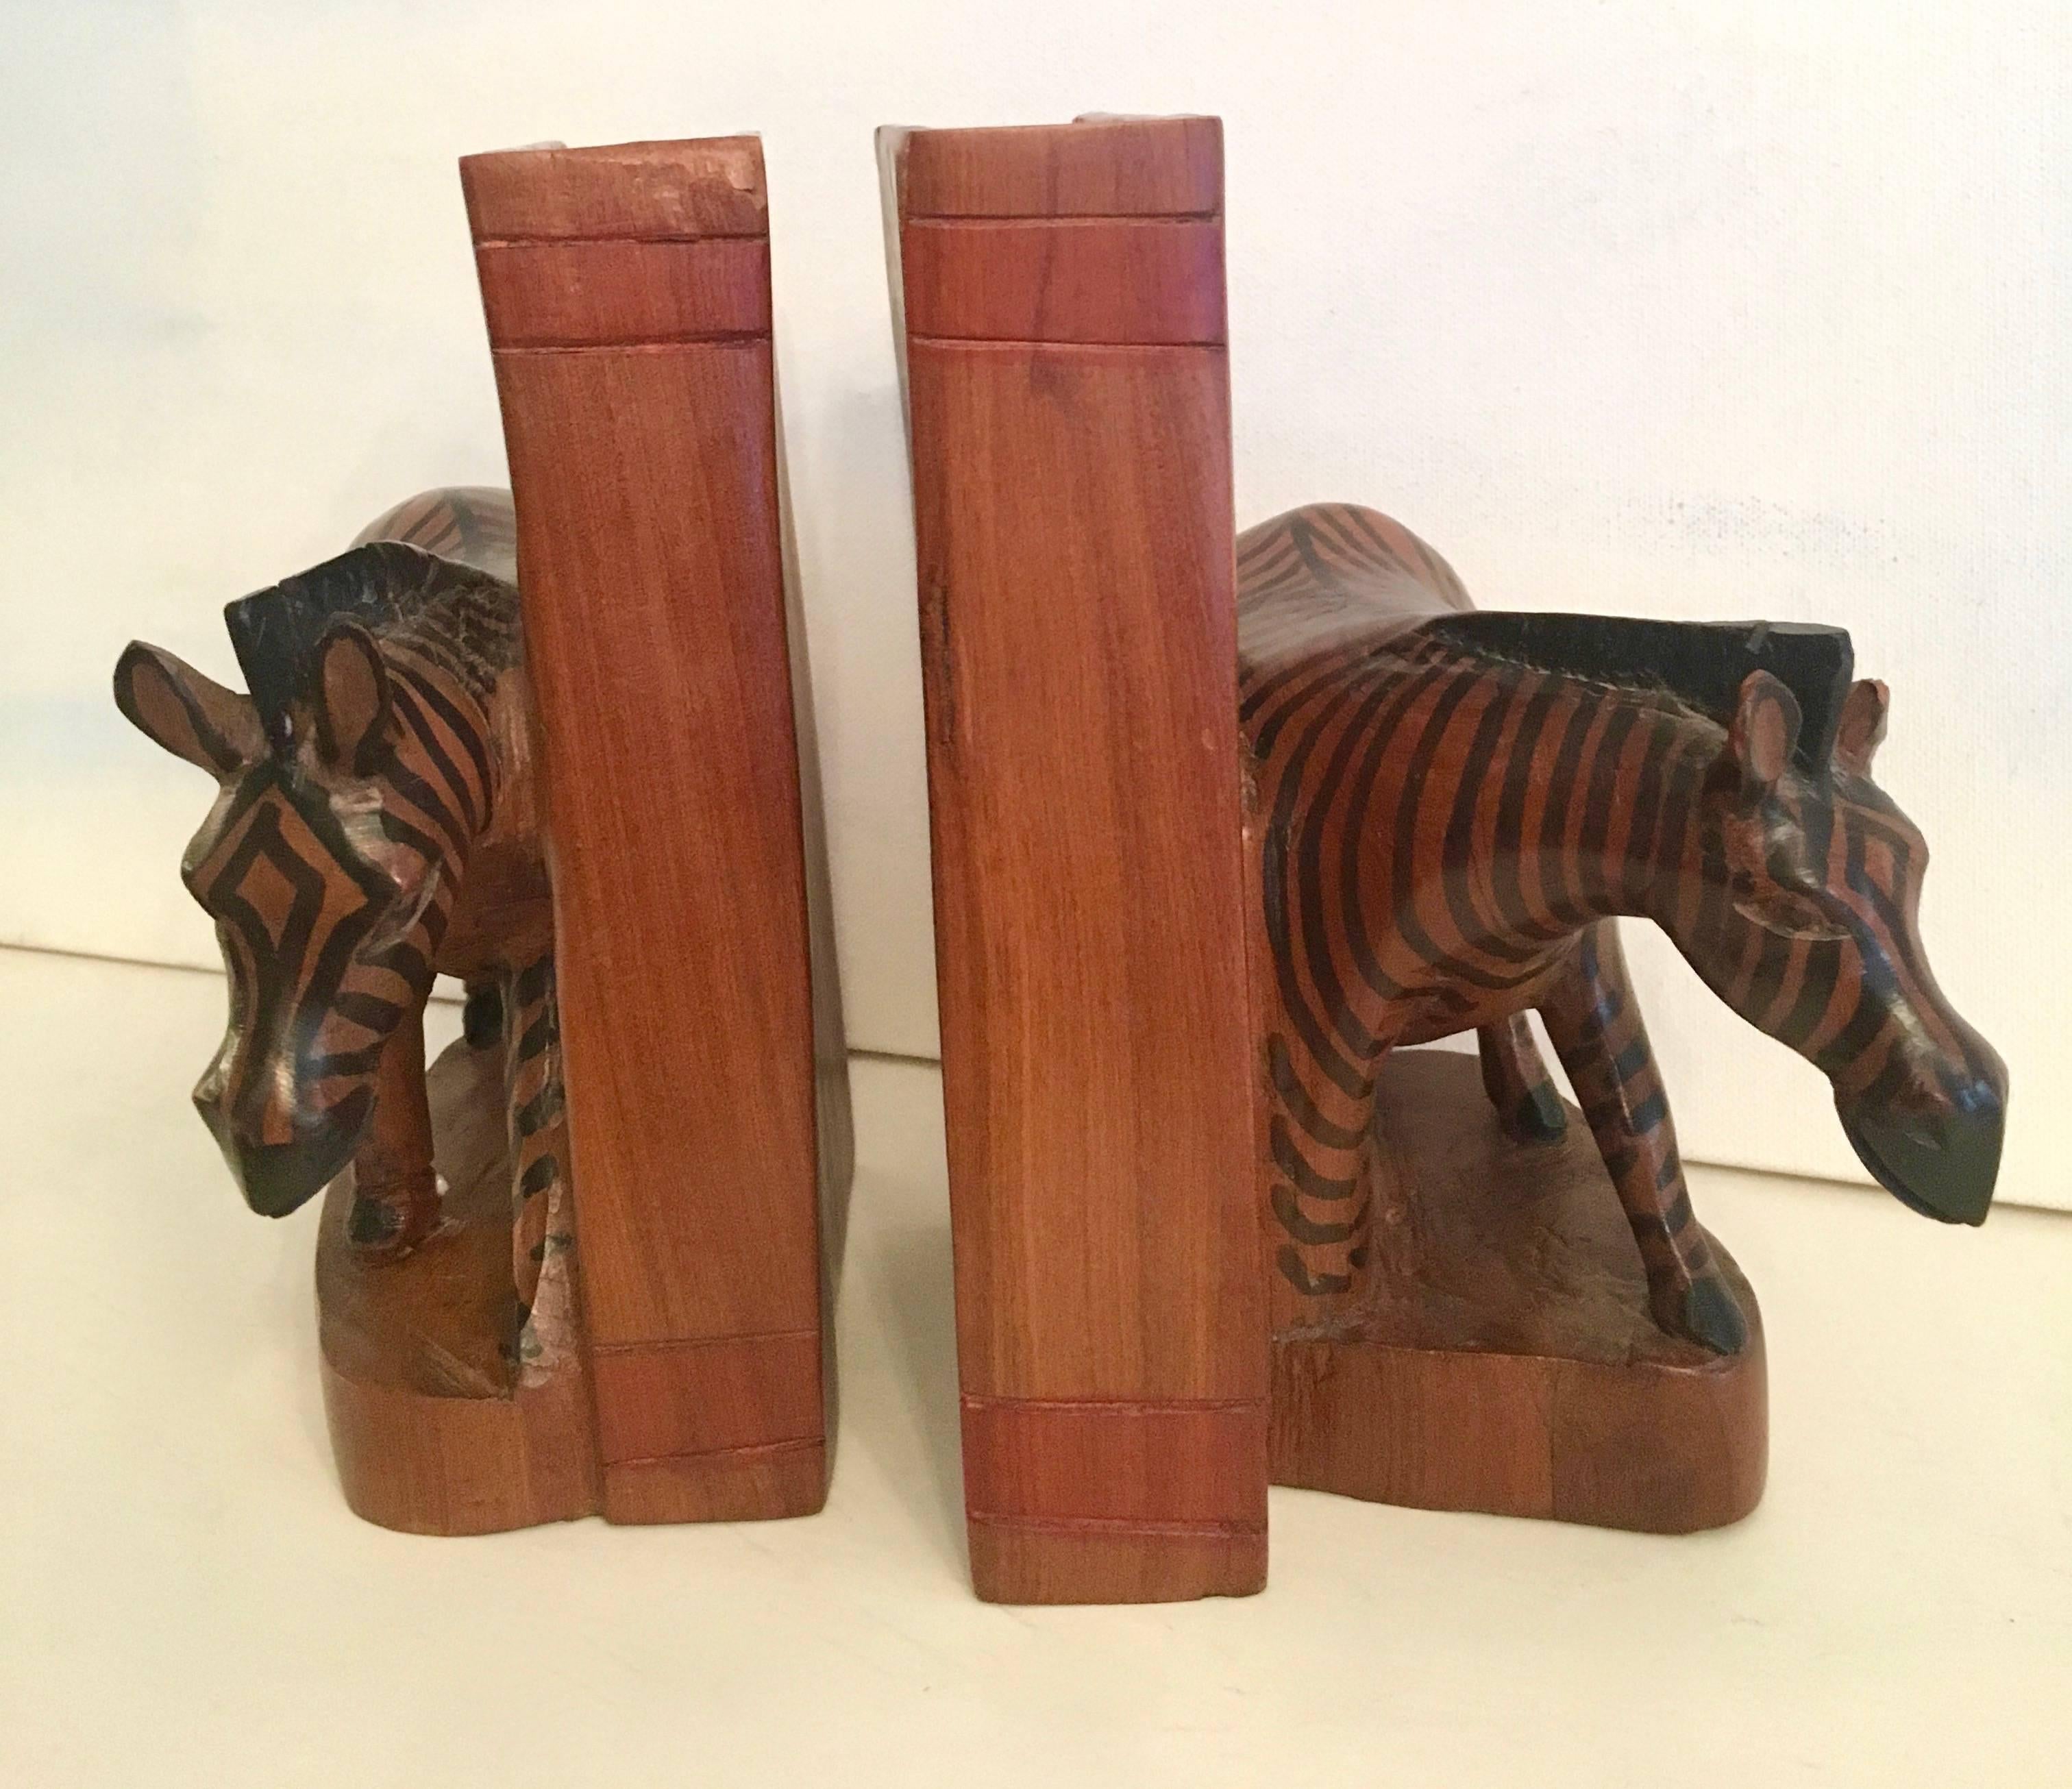 Kenyan Pair of Hand-Carved Zebra Bookends from Kenya